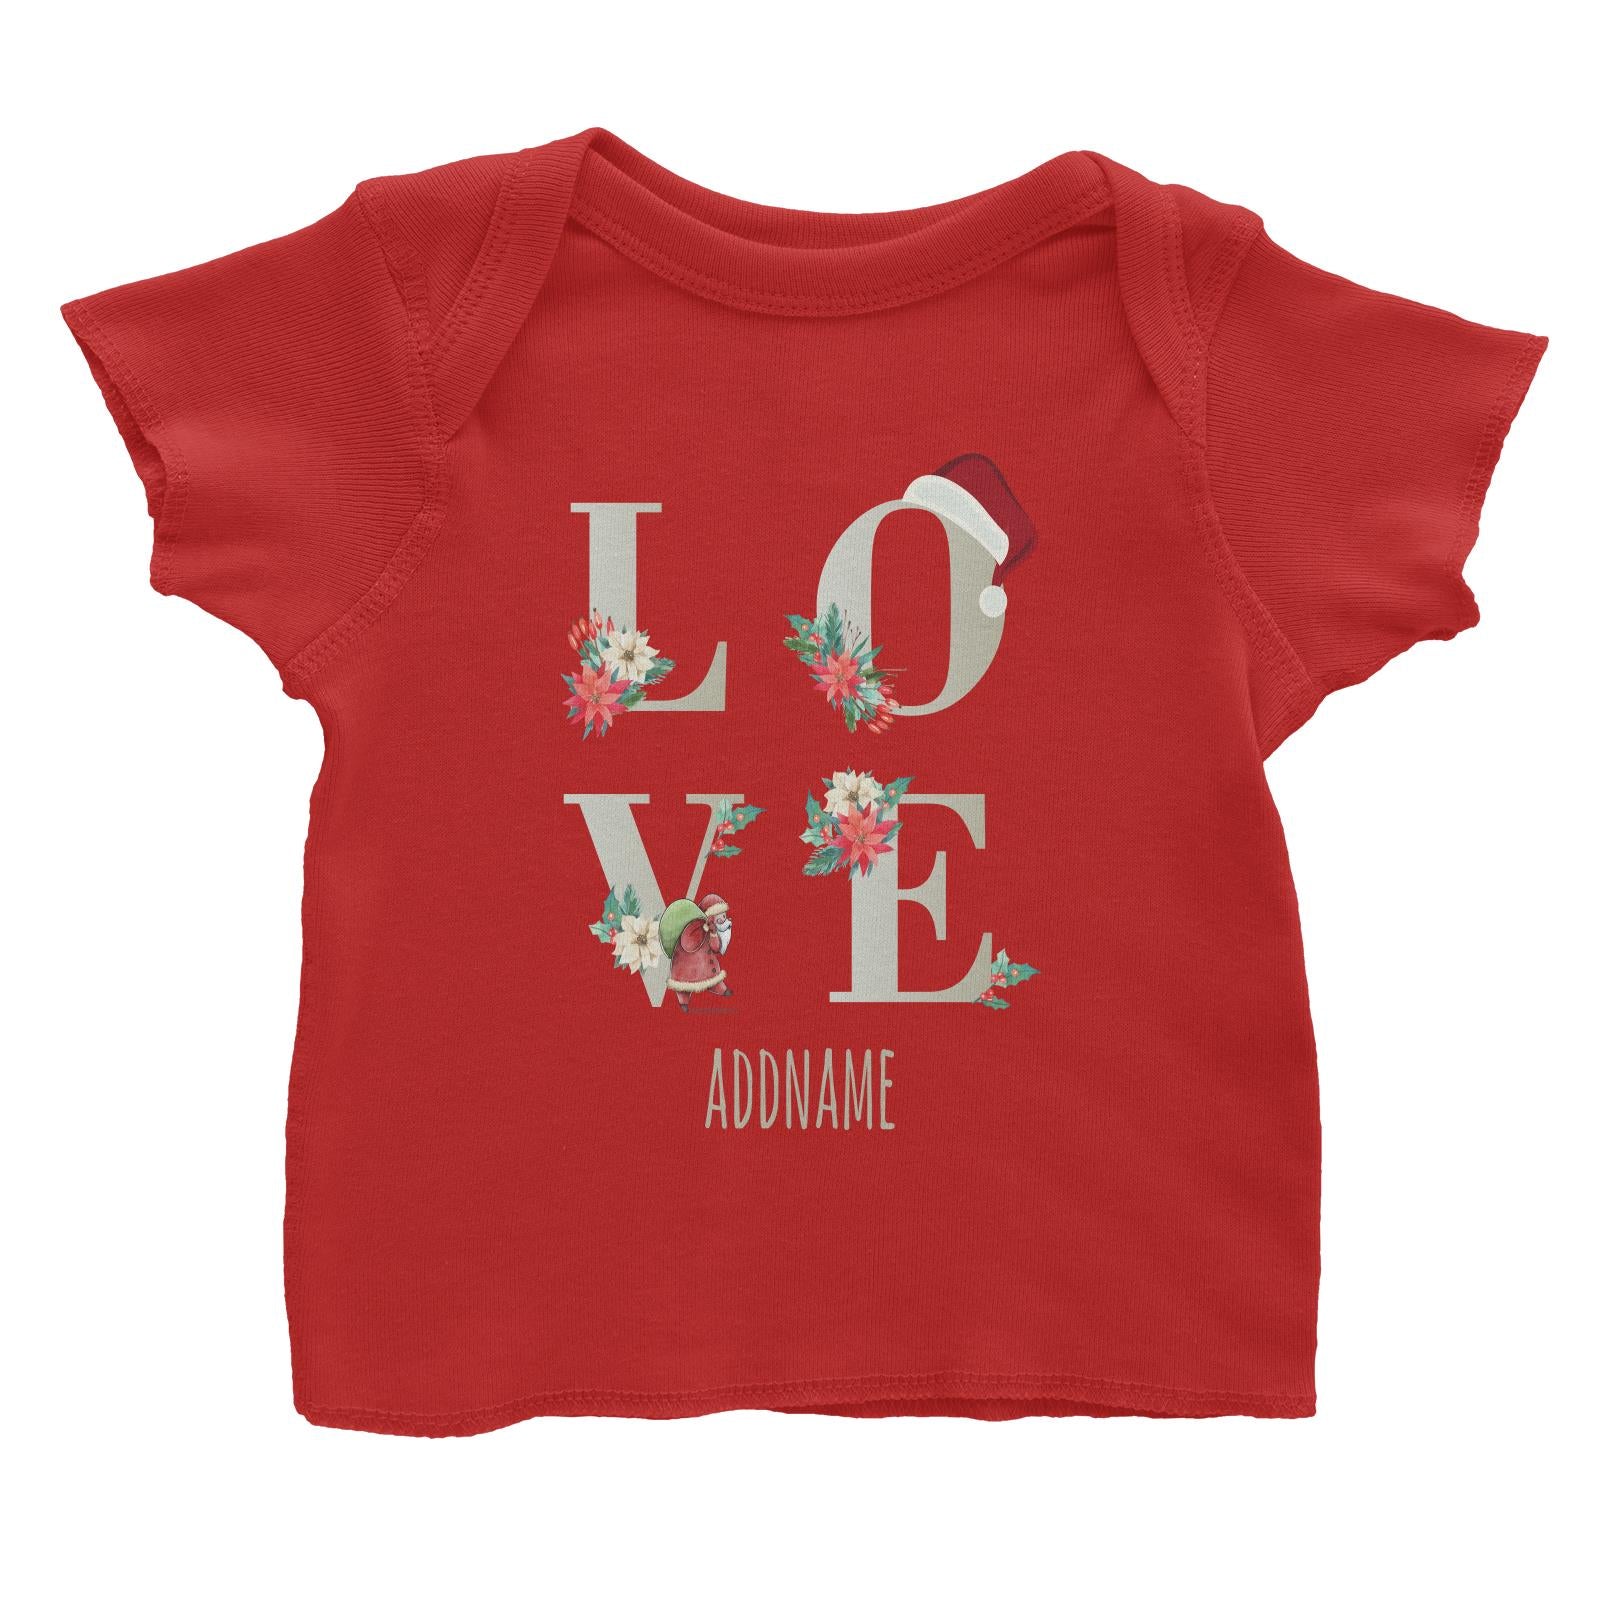 LOVE with Christmas Elements Addname Baby T-Shirt  Matching Family Personalizable Designs